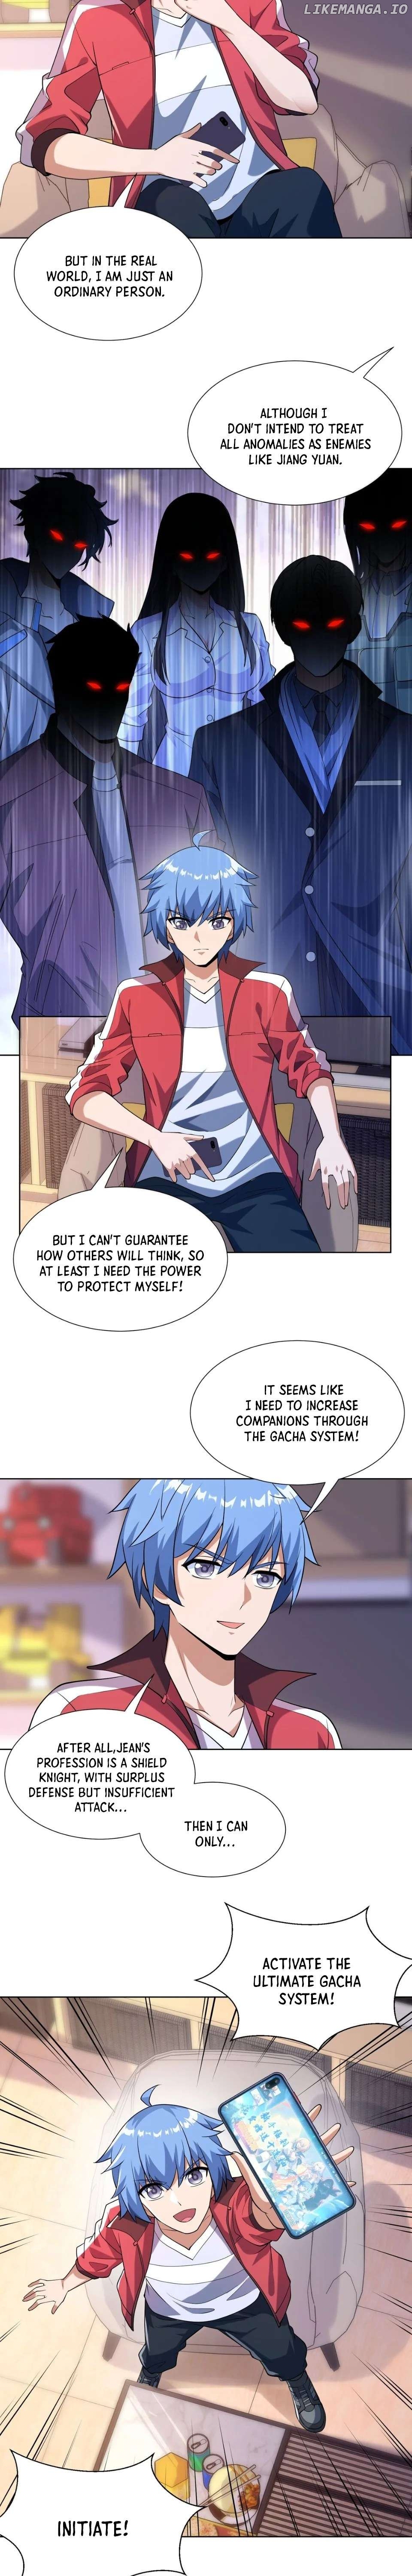 I Can Use the Card Drawing System to Summon Beautiful Girls Chapter 6 - page 3